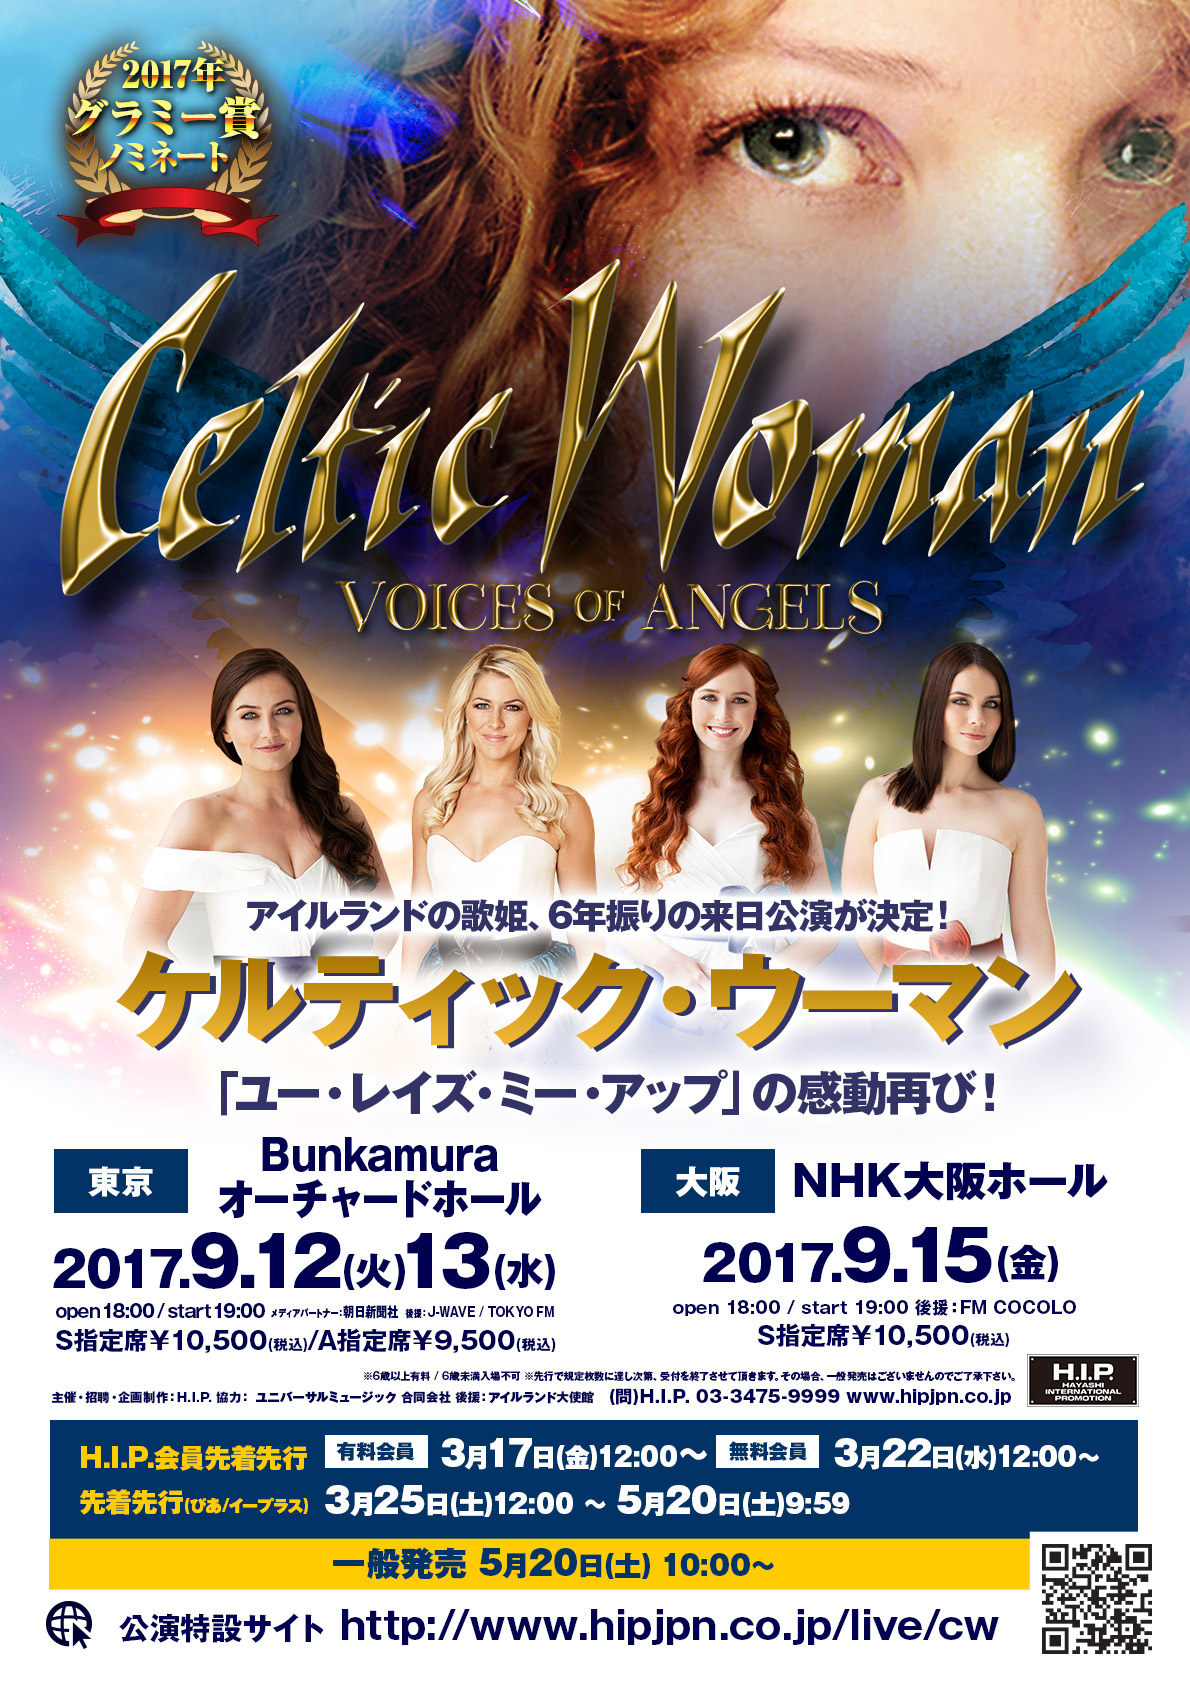 Celtic Woman VOICES OF ANGELS